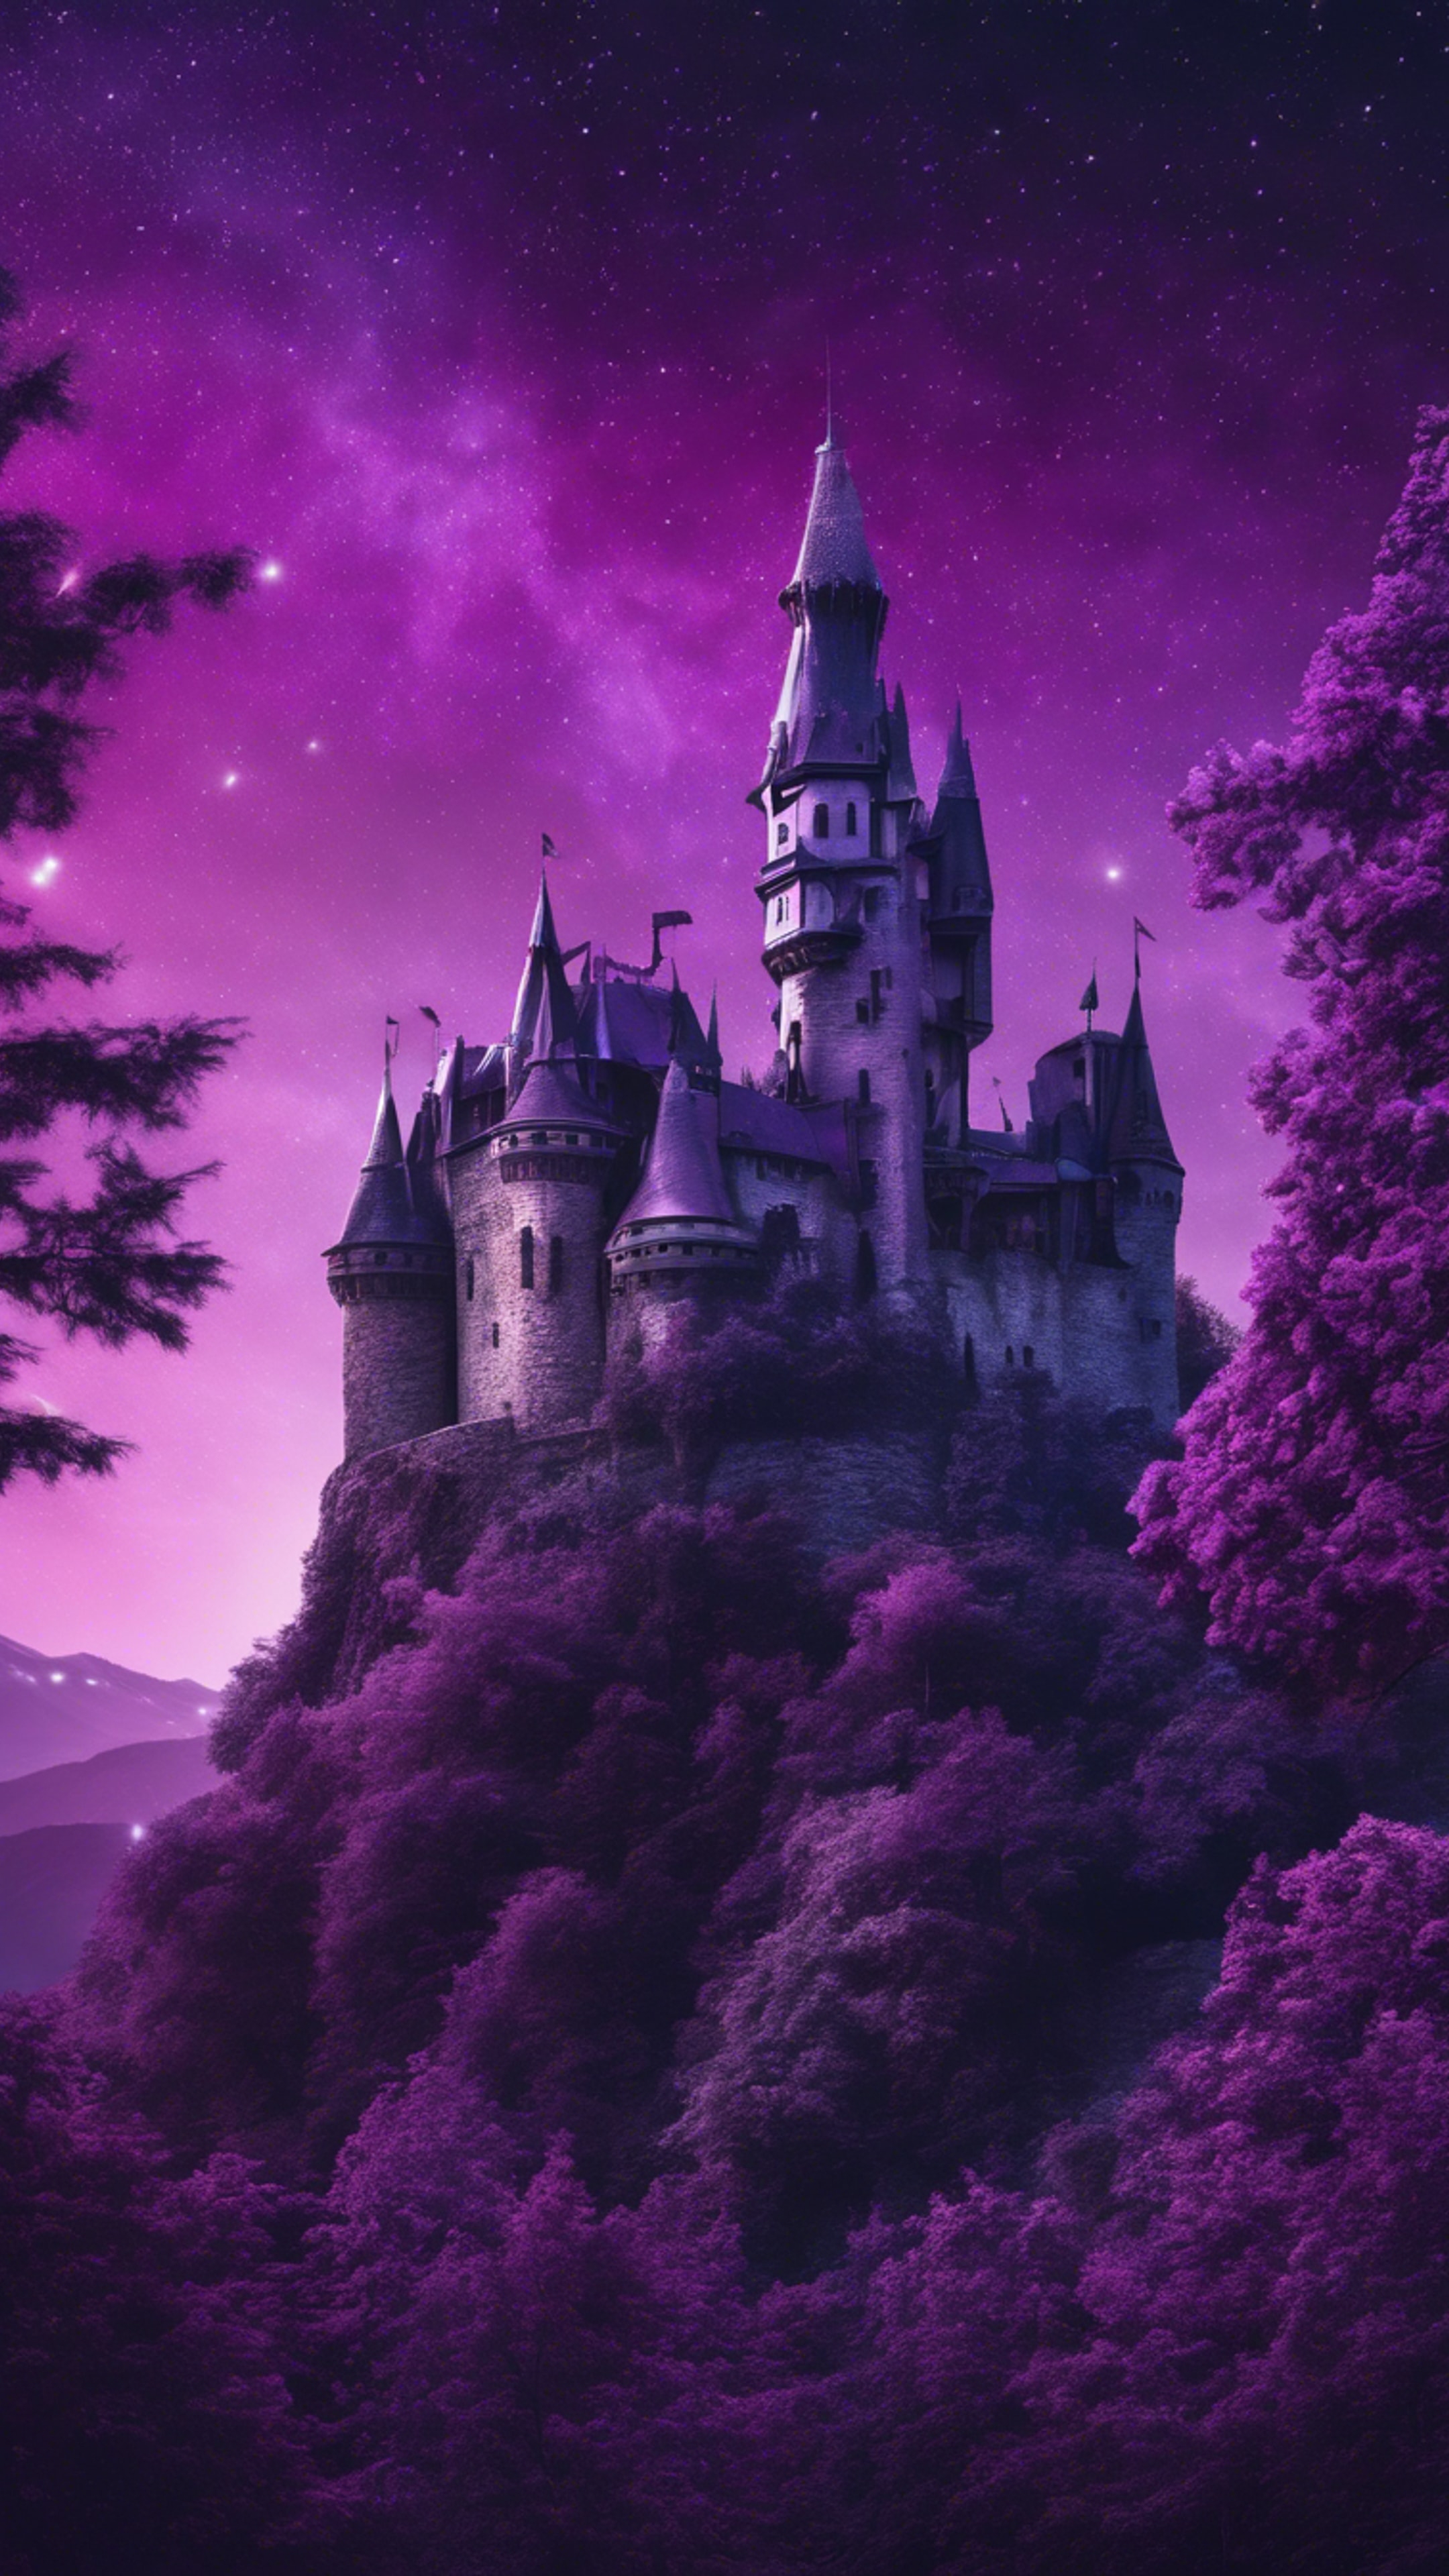 An imaginative collage including a deep purple night sky, a majestic purple castle, and a lush violet forest. Wallpaper[d69784f3cee744e79a0a]